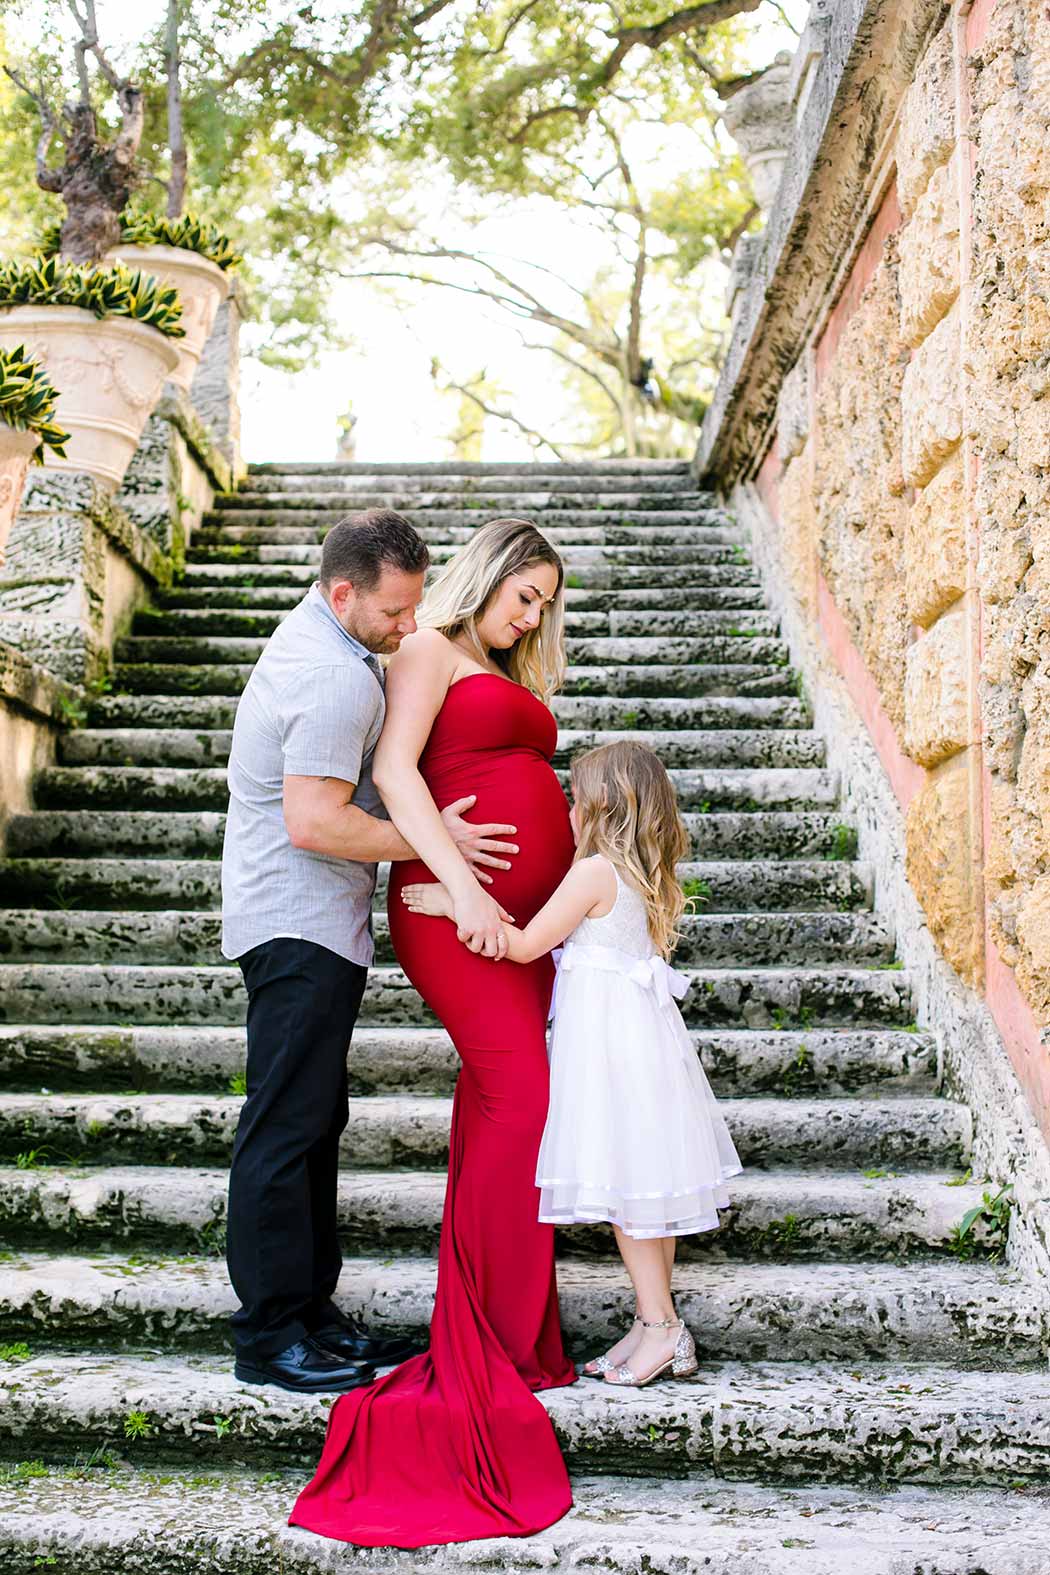 family of three maternity photoshoot on steps at vizcaya museum miami | maternity photographer fort lauderdale